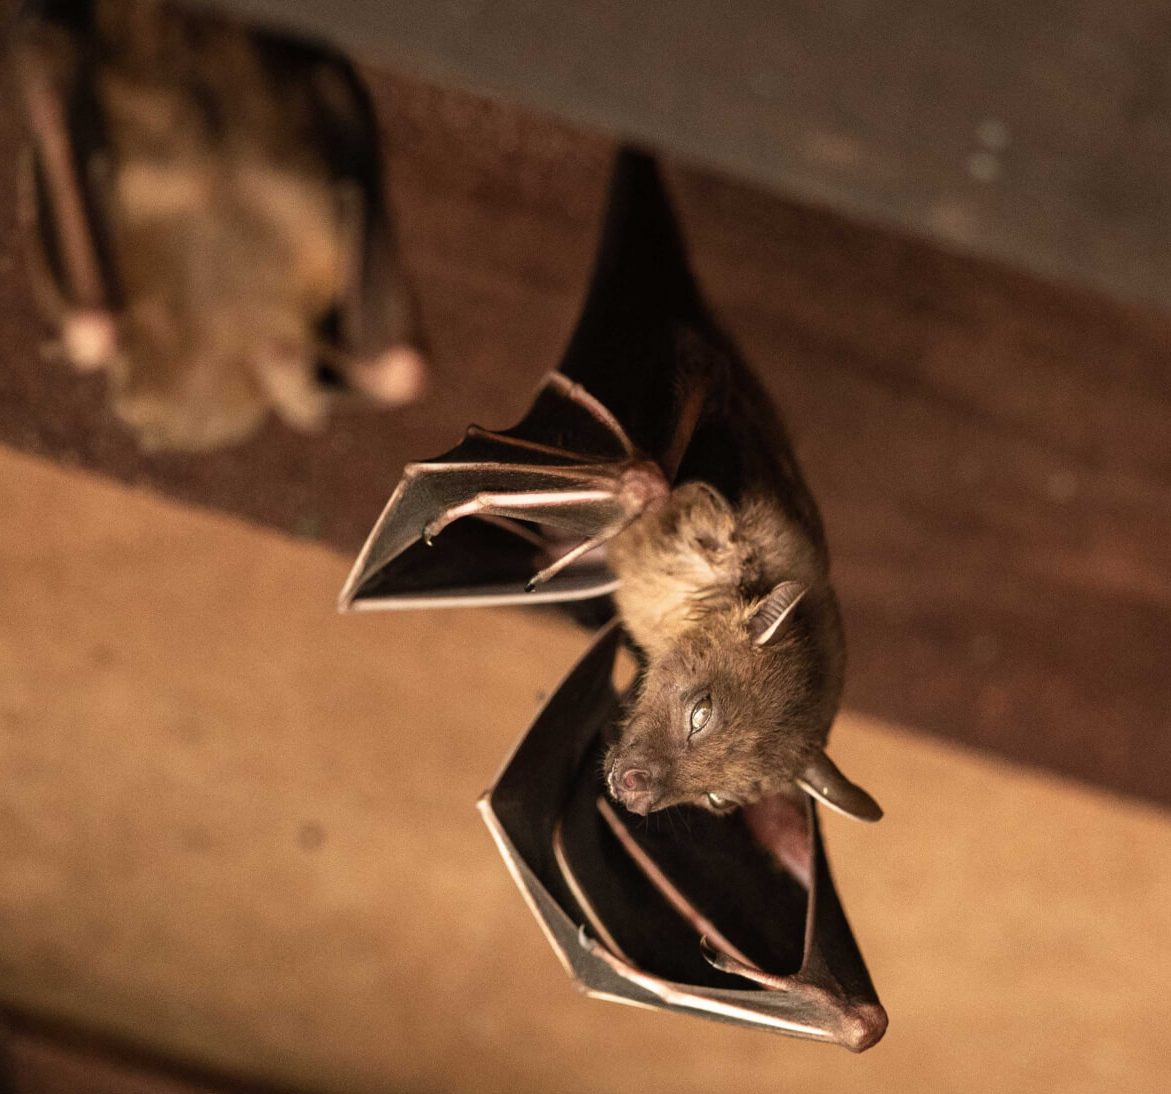 Expert bat removal services for a safe and humane solution in Sioux Falls